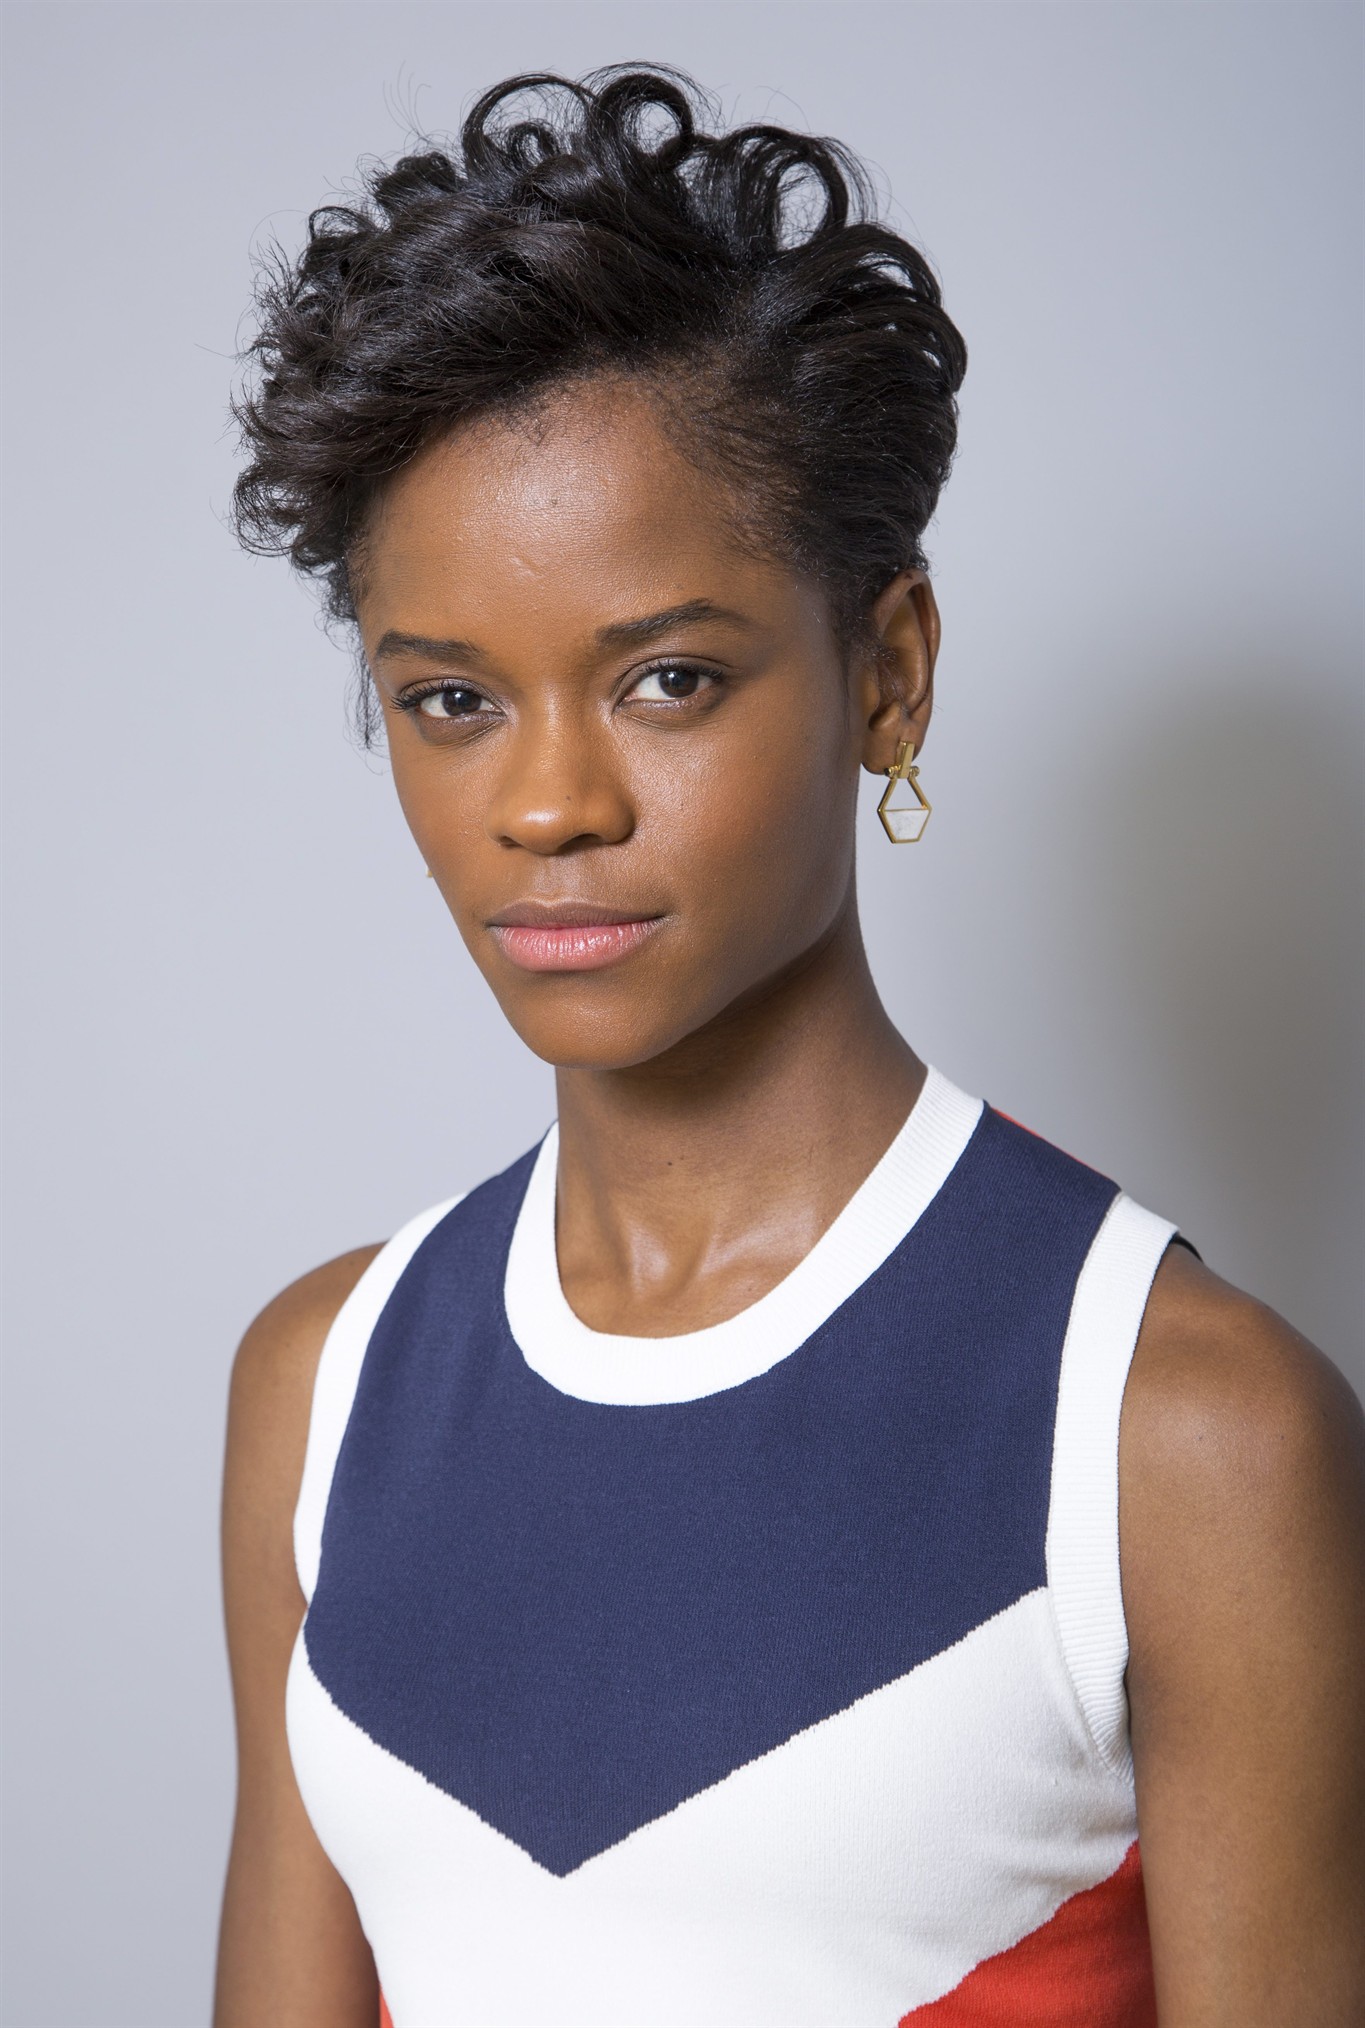 Letitia Wright steals show in 'Black Panther' breakout role.